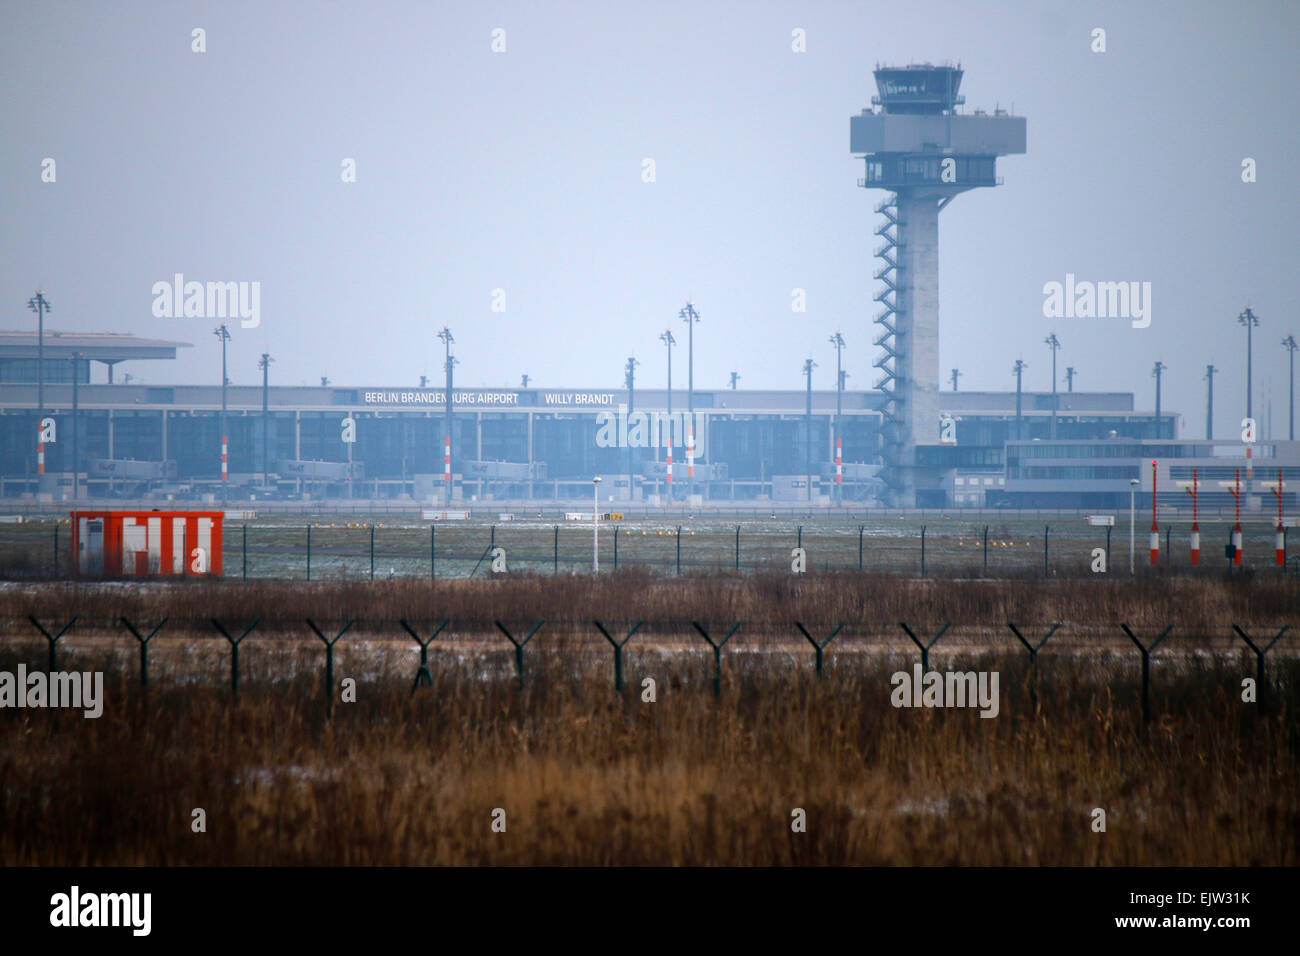 CIRCA DECEMBER 2014 - BERLIN: impressions from the notorious new airport of Berlin 'BER Willy Brandt airport' which still is a h Stock Photo